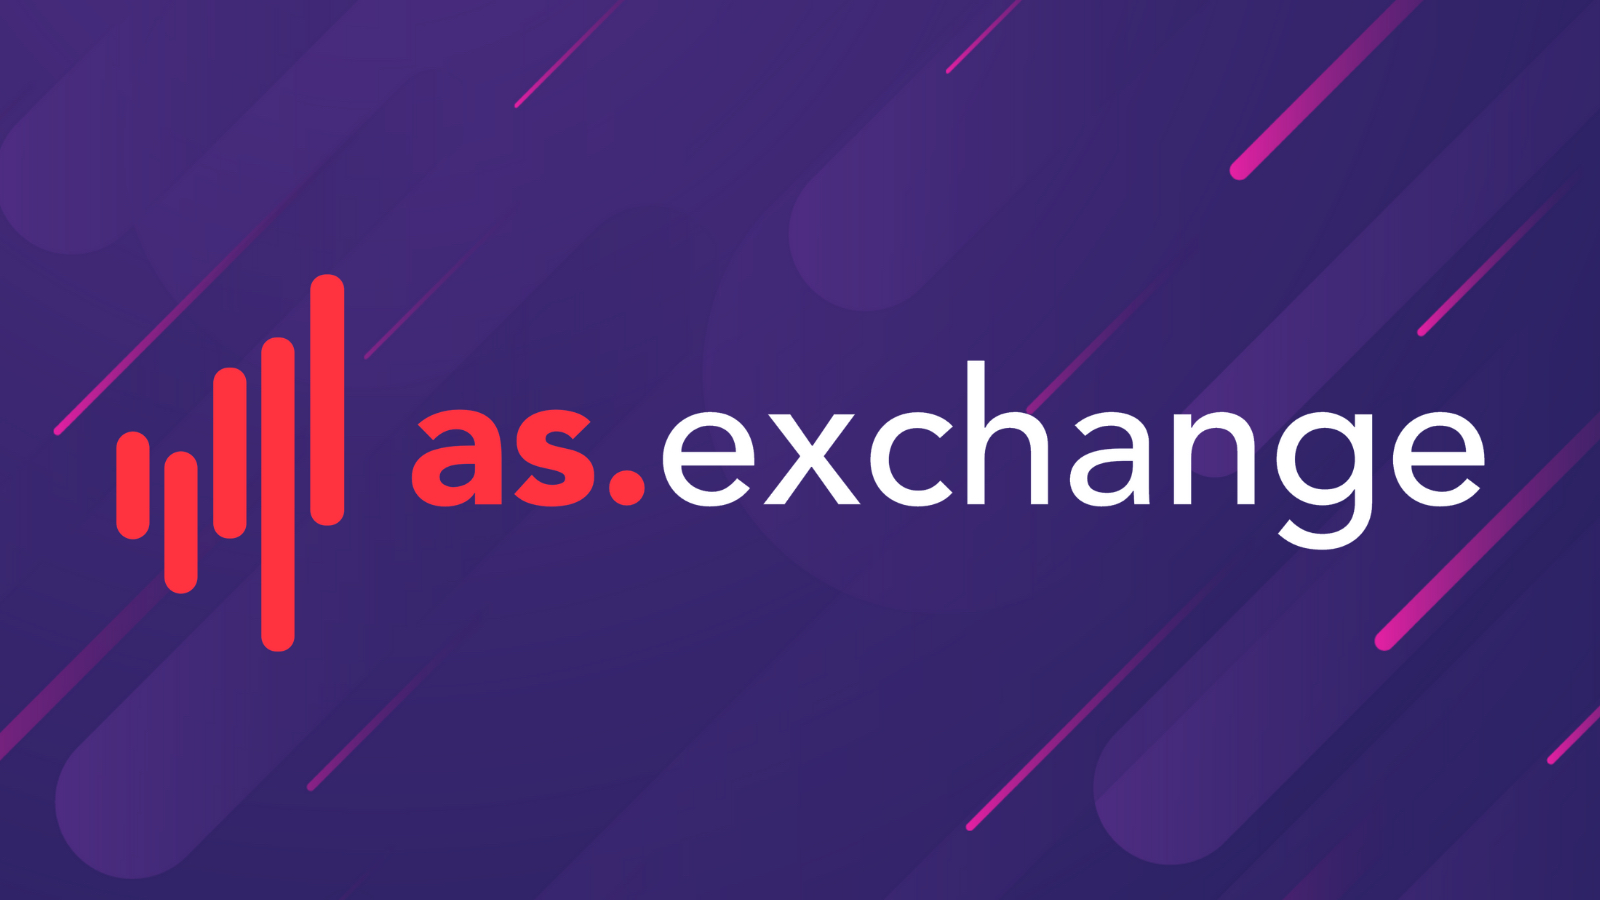 as.exchange: Innovative Derivatives Exchange is Launched – Now Traders Can Diversify Returns Within Single Asset